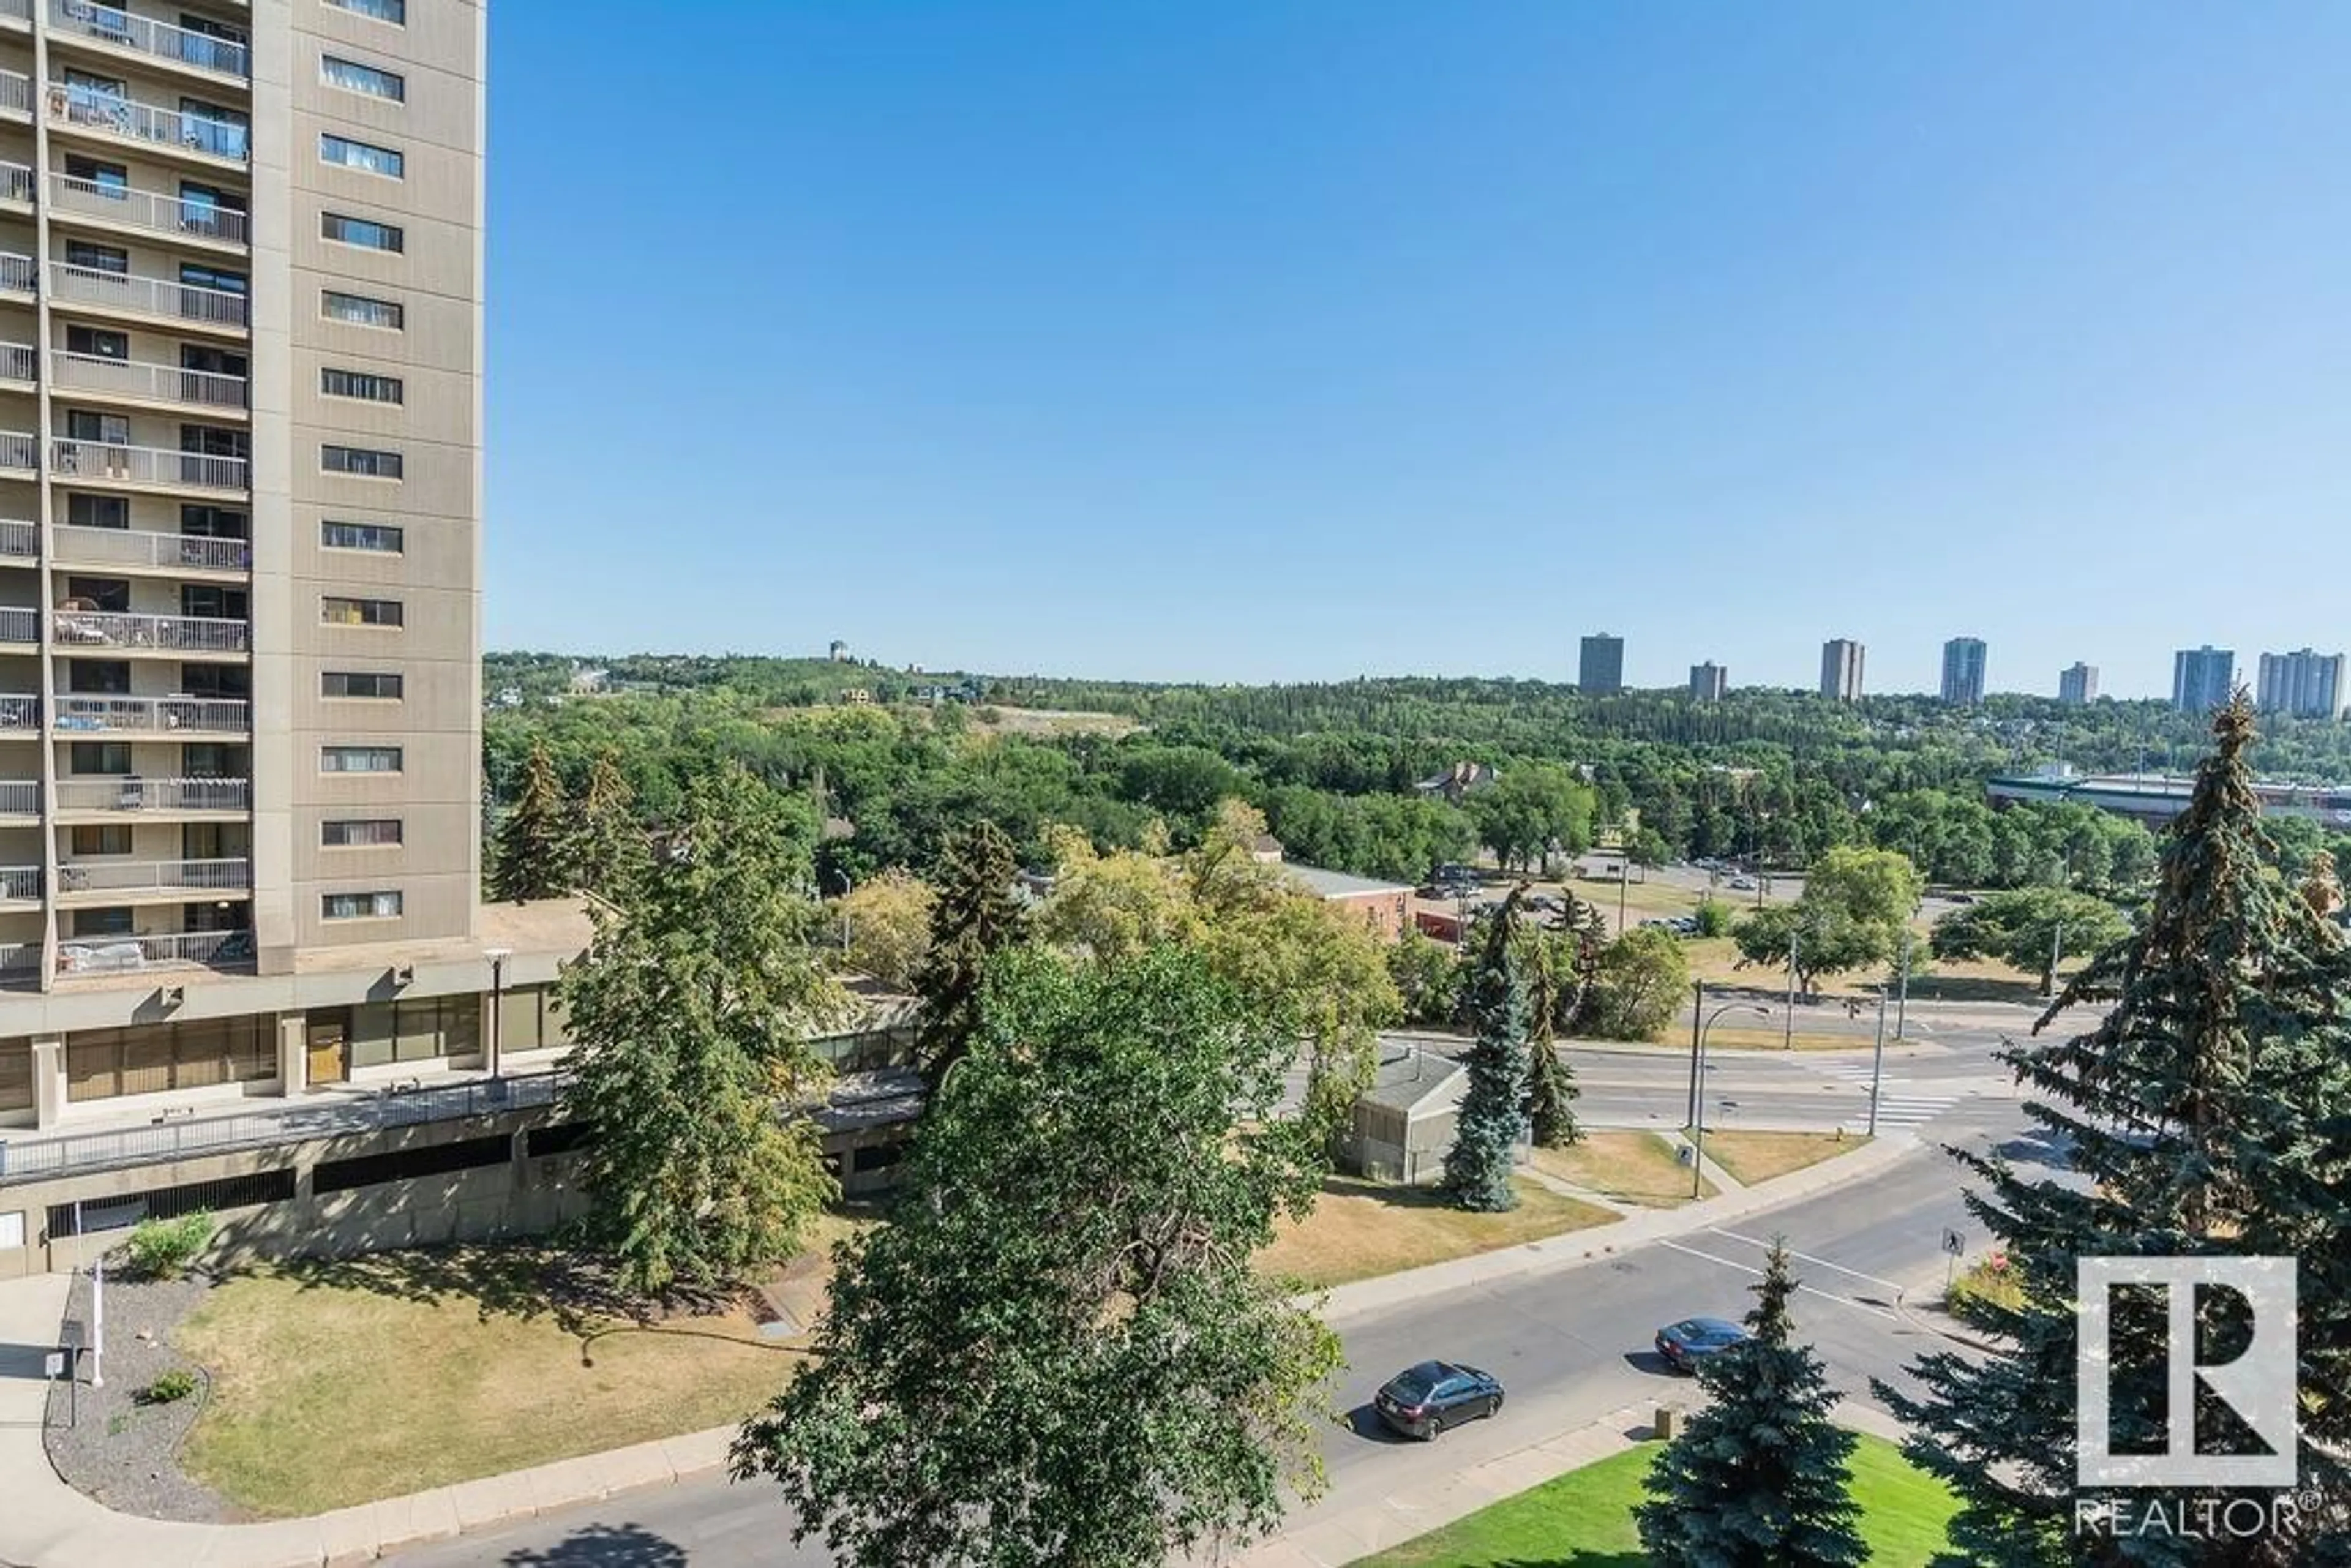 Lakeview for #703 9808 103 ST NW, Edmonton Alberta T5K2G4